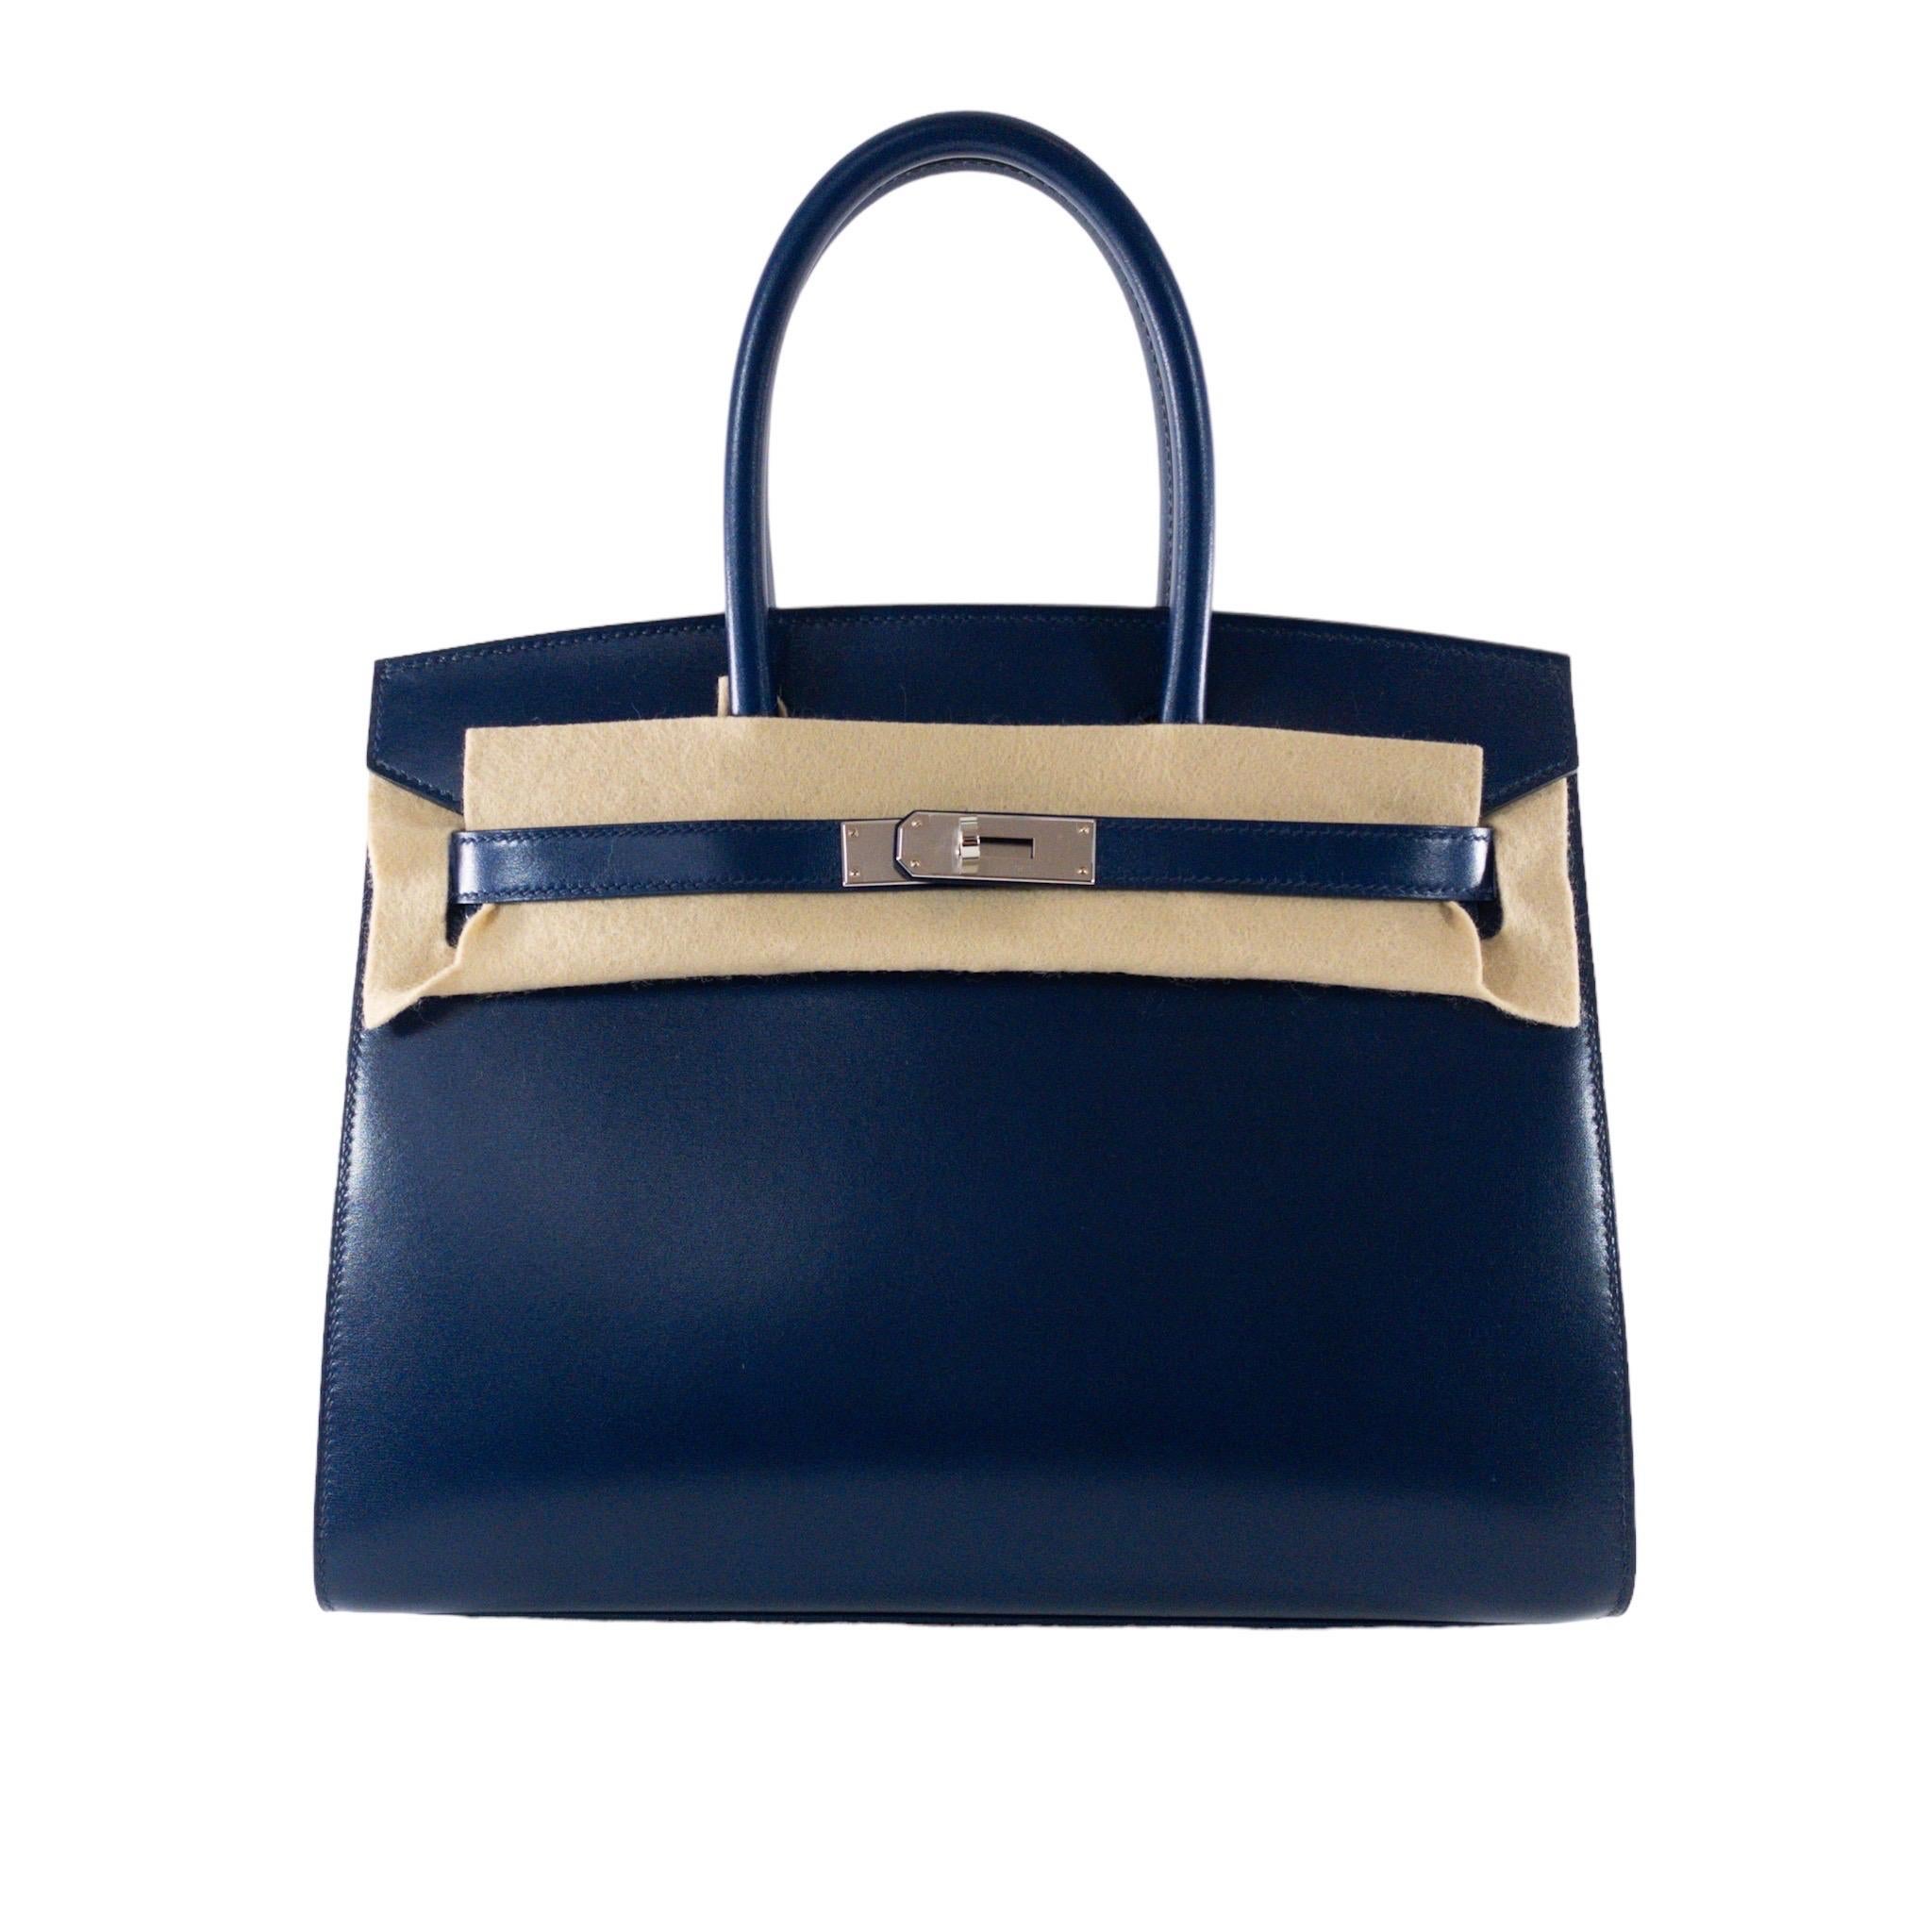 Consign of the Times presents this Brand new in box authentic Hermes Birkin Sellier 30cm in Blue Sapphire Box leather and Palladium hardware. This bag features double rolled top handles with short flap closure. Opens with two leather straps and